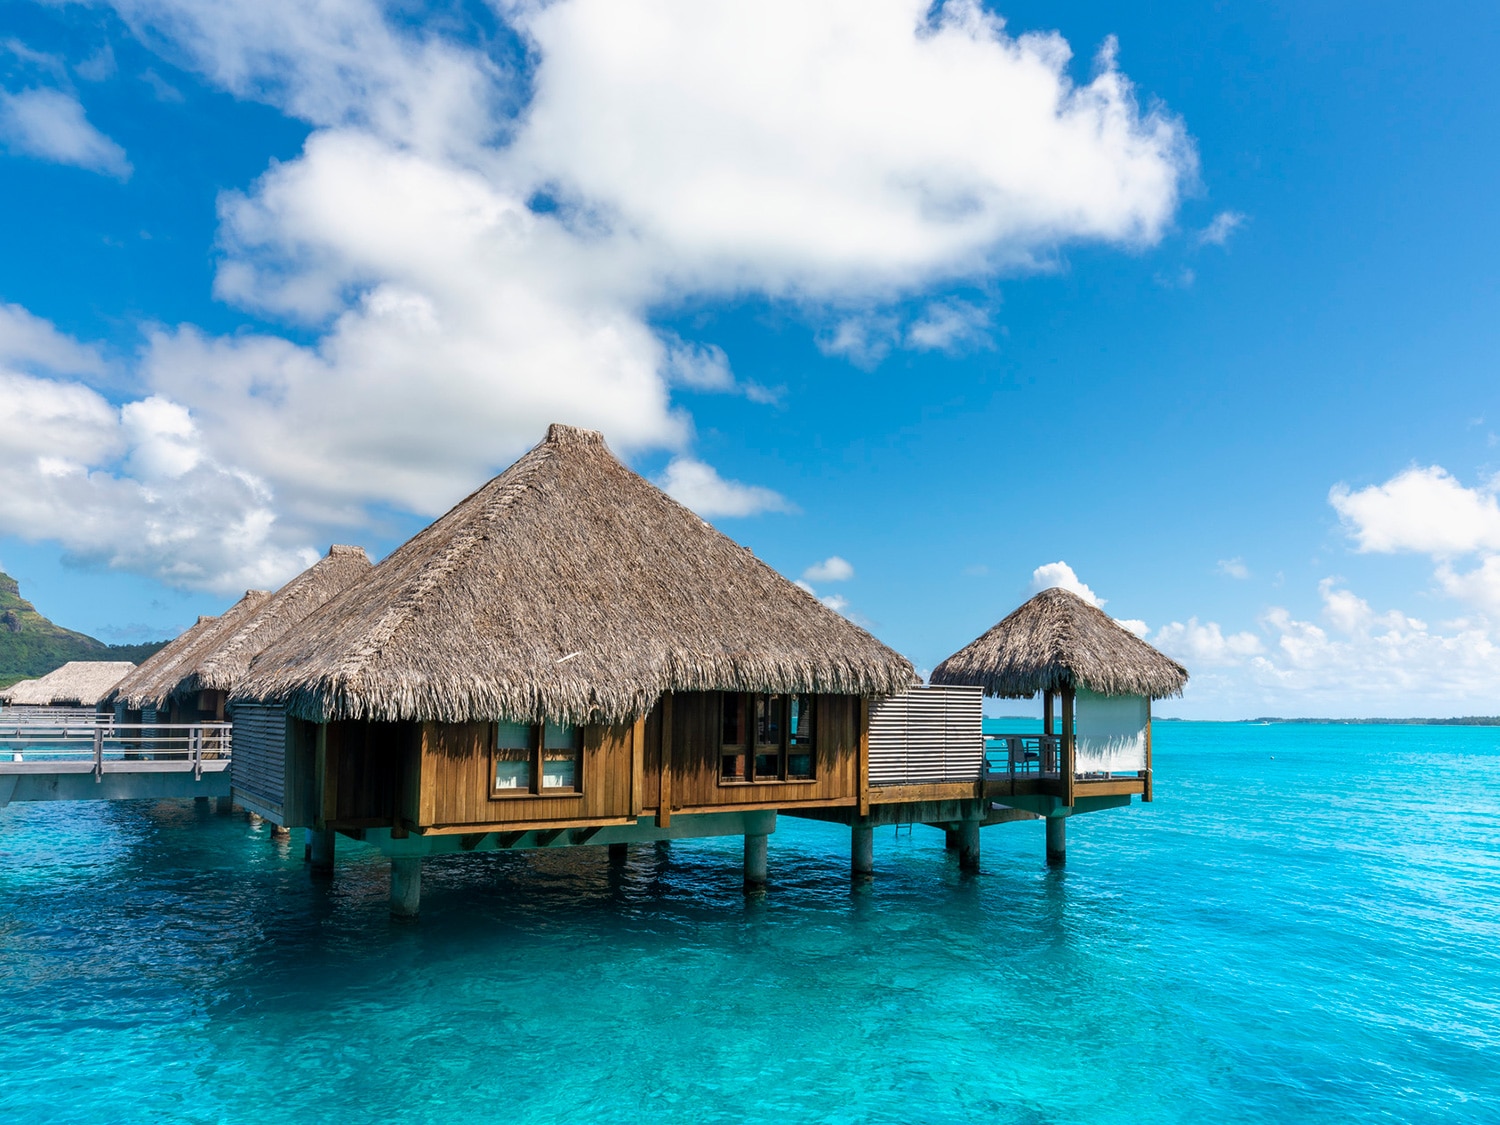 The exterior view of the overwater villa at St. Regis Bora Bora in French Polynesia.